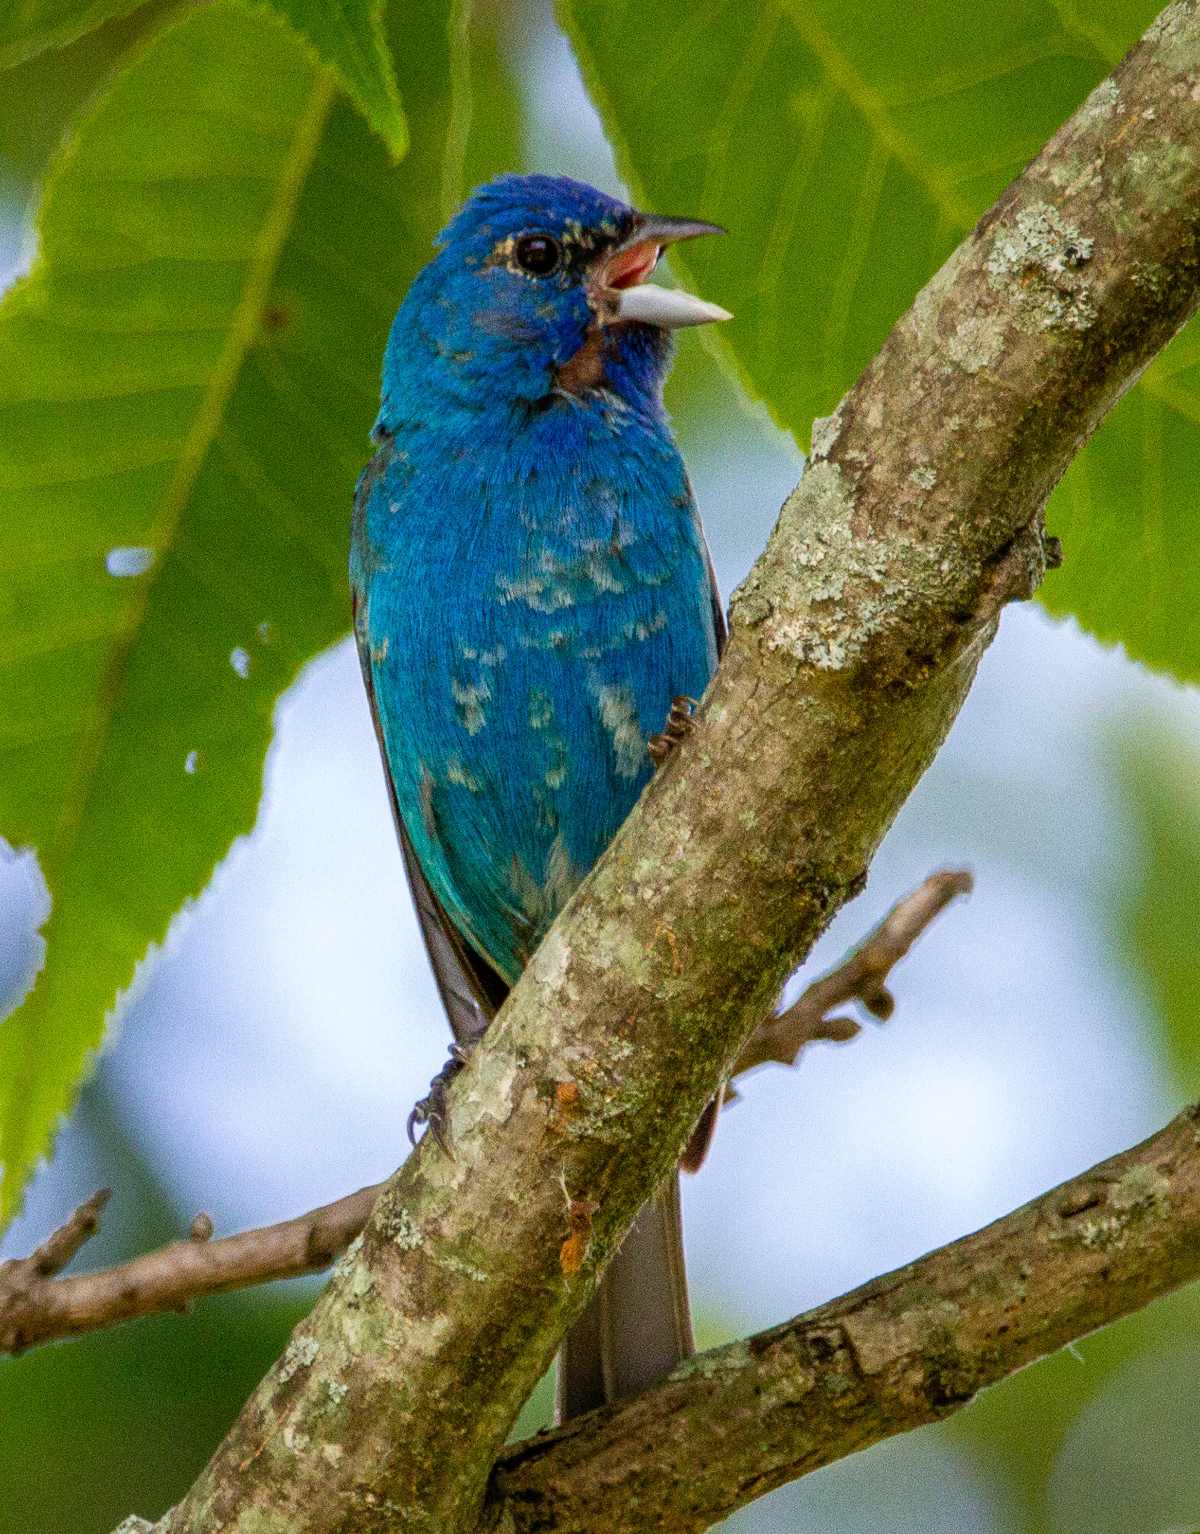 Indigo bunting singing in a tree, highlighting that studies show bird songs improve reduce depression and anxiety